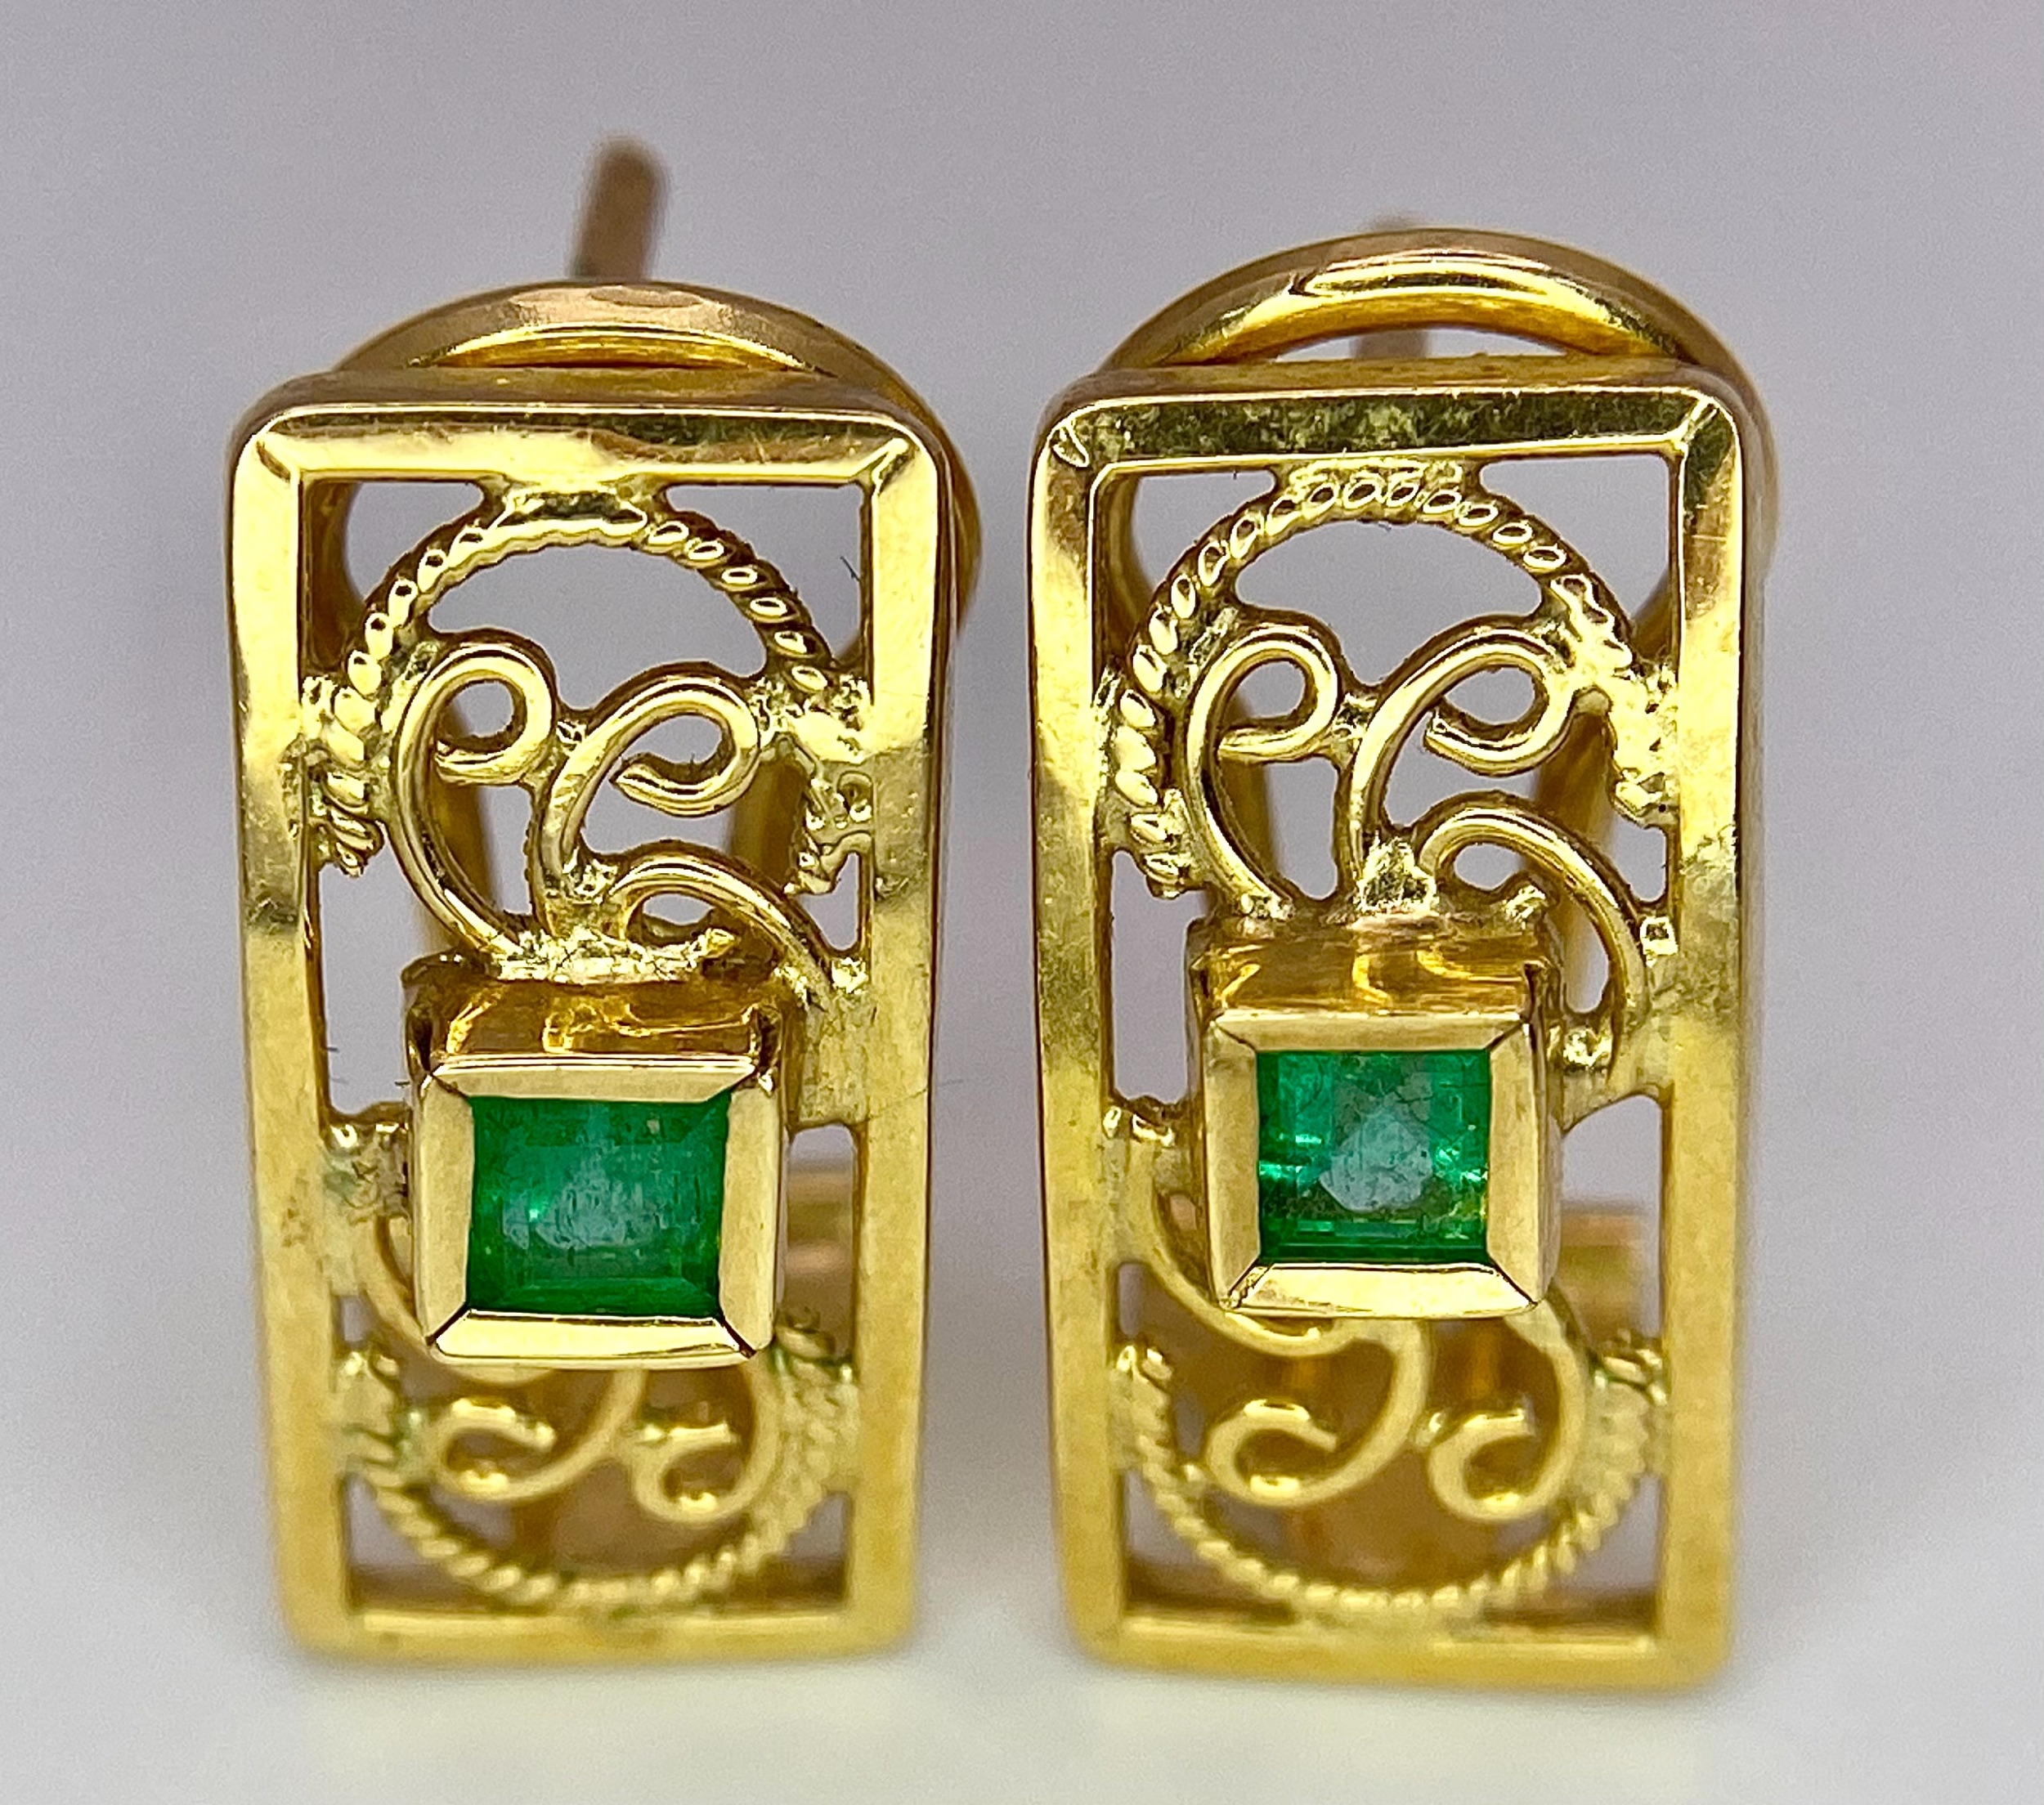 A Pair of 18K Yellow Gold and Emerald Earrings. Clip clasp with pierced decoration. 17mm. 3.9g total